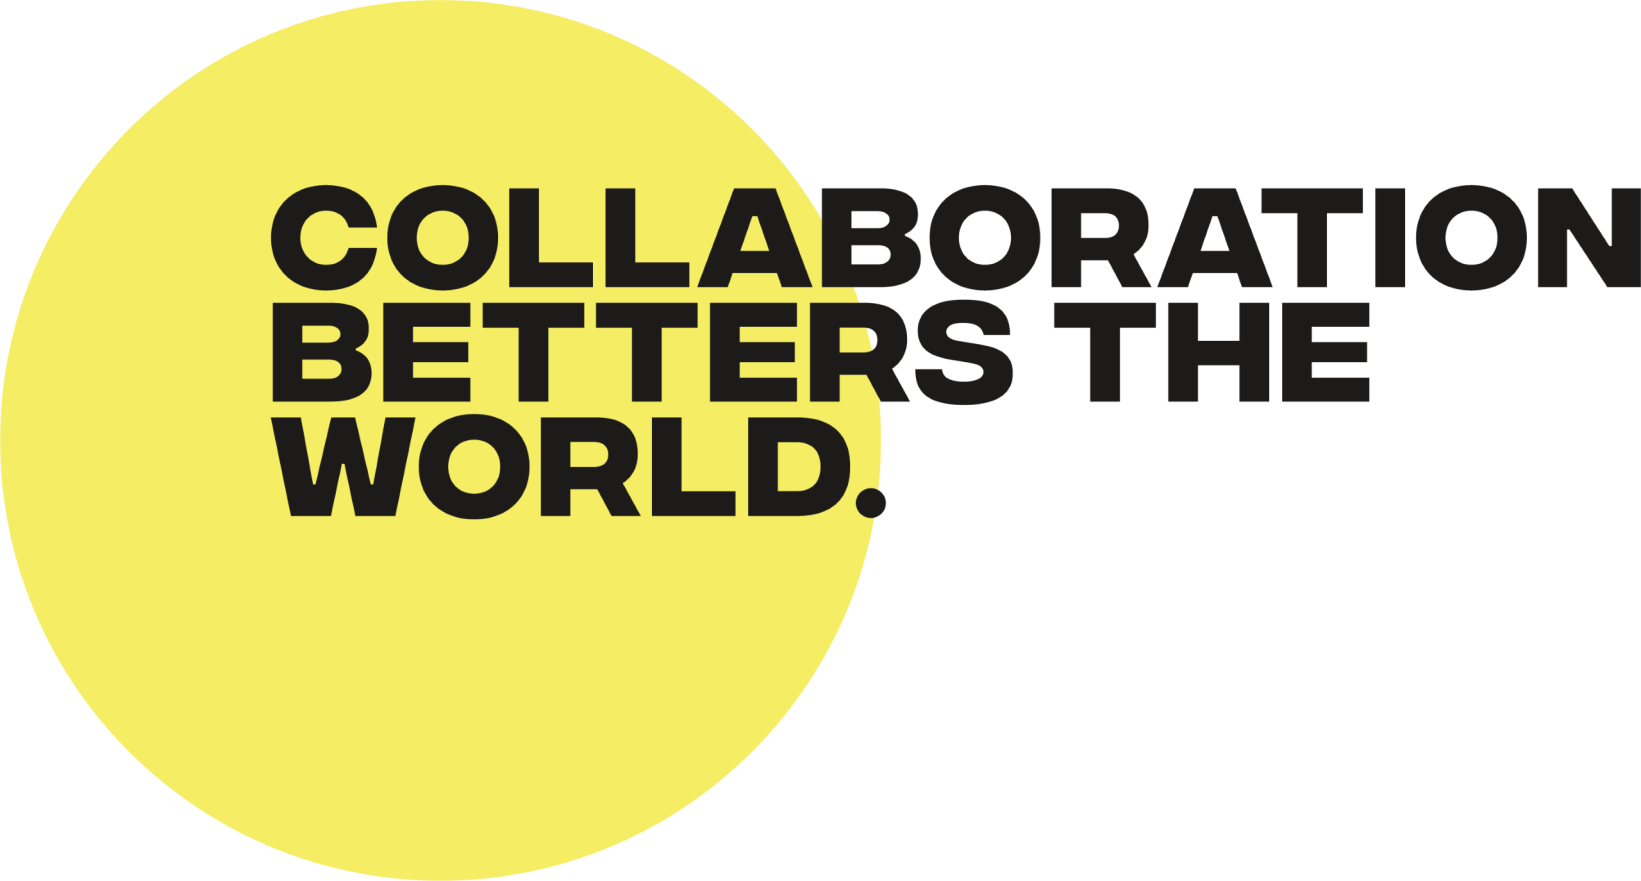 Collaboration Betters The World